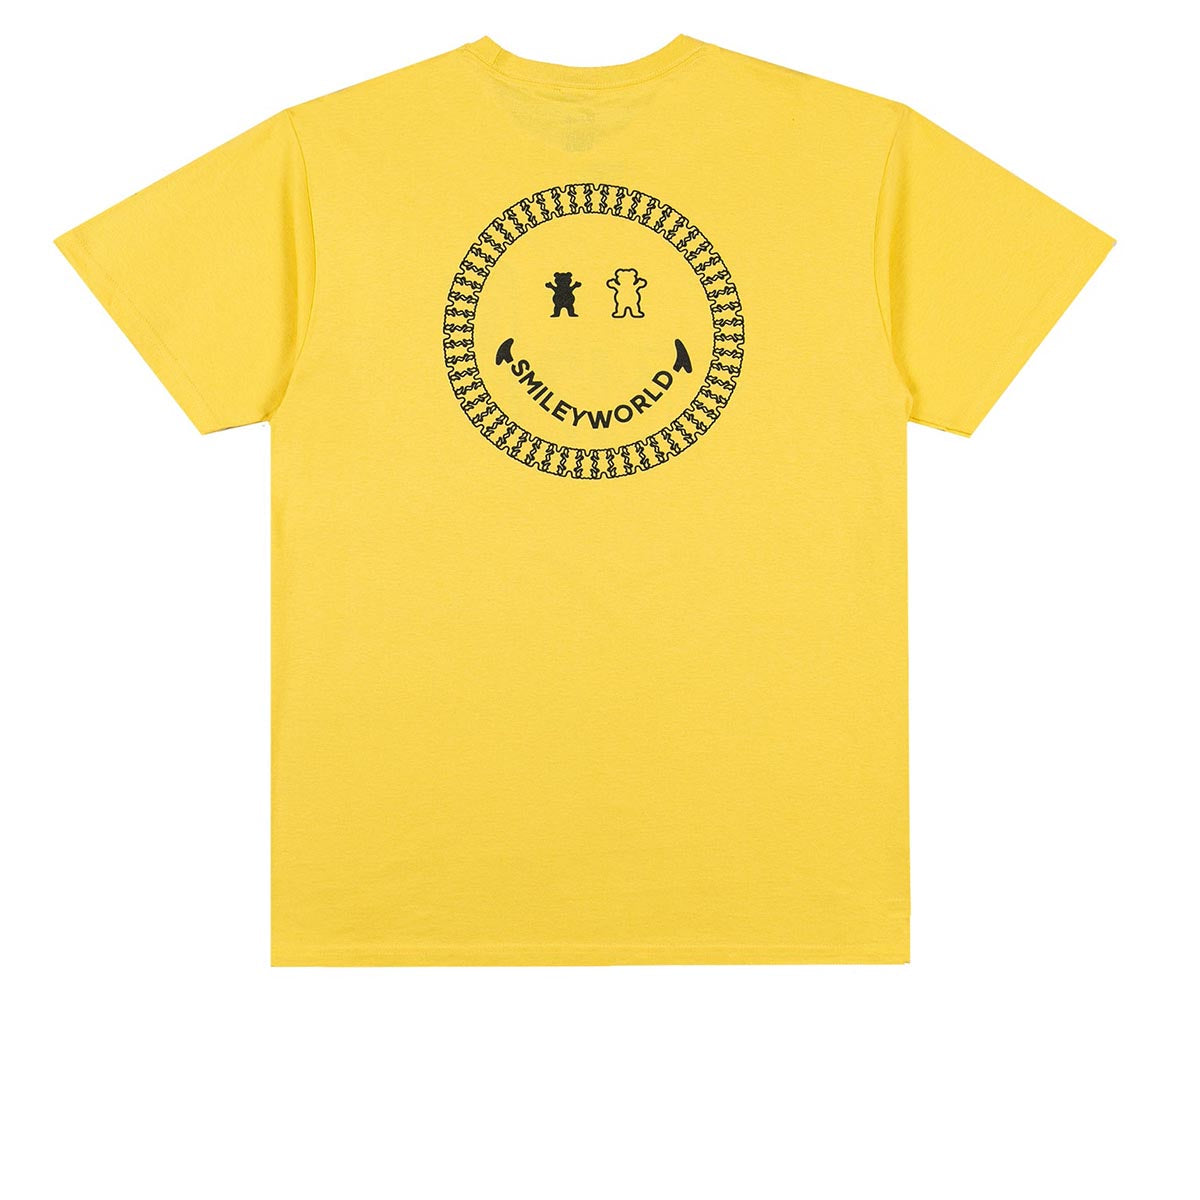 Grizzly x Smiley World School Of Happiness T-Shirt - Yellow image 2